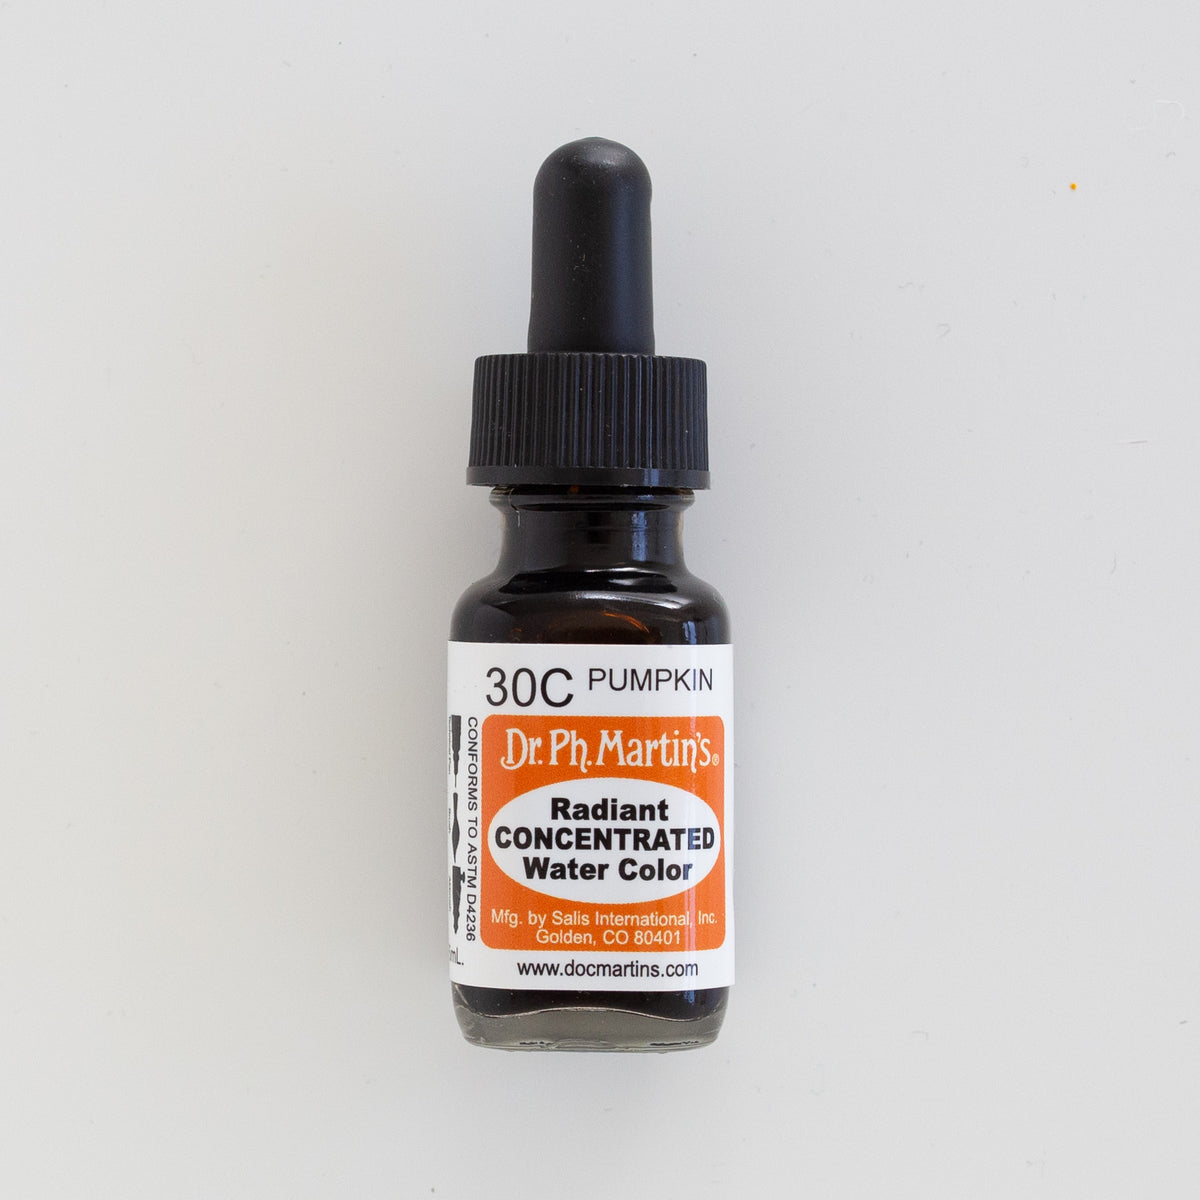 Dr. Ph. Martin’s Radiant Concentrated 30C Pumpkin